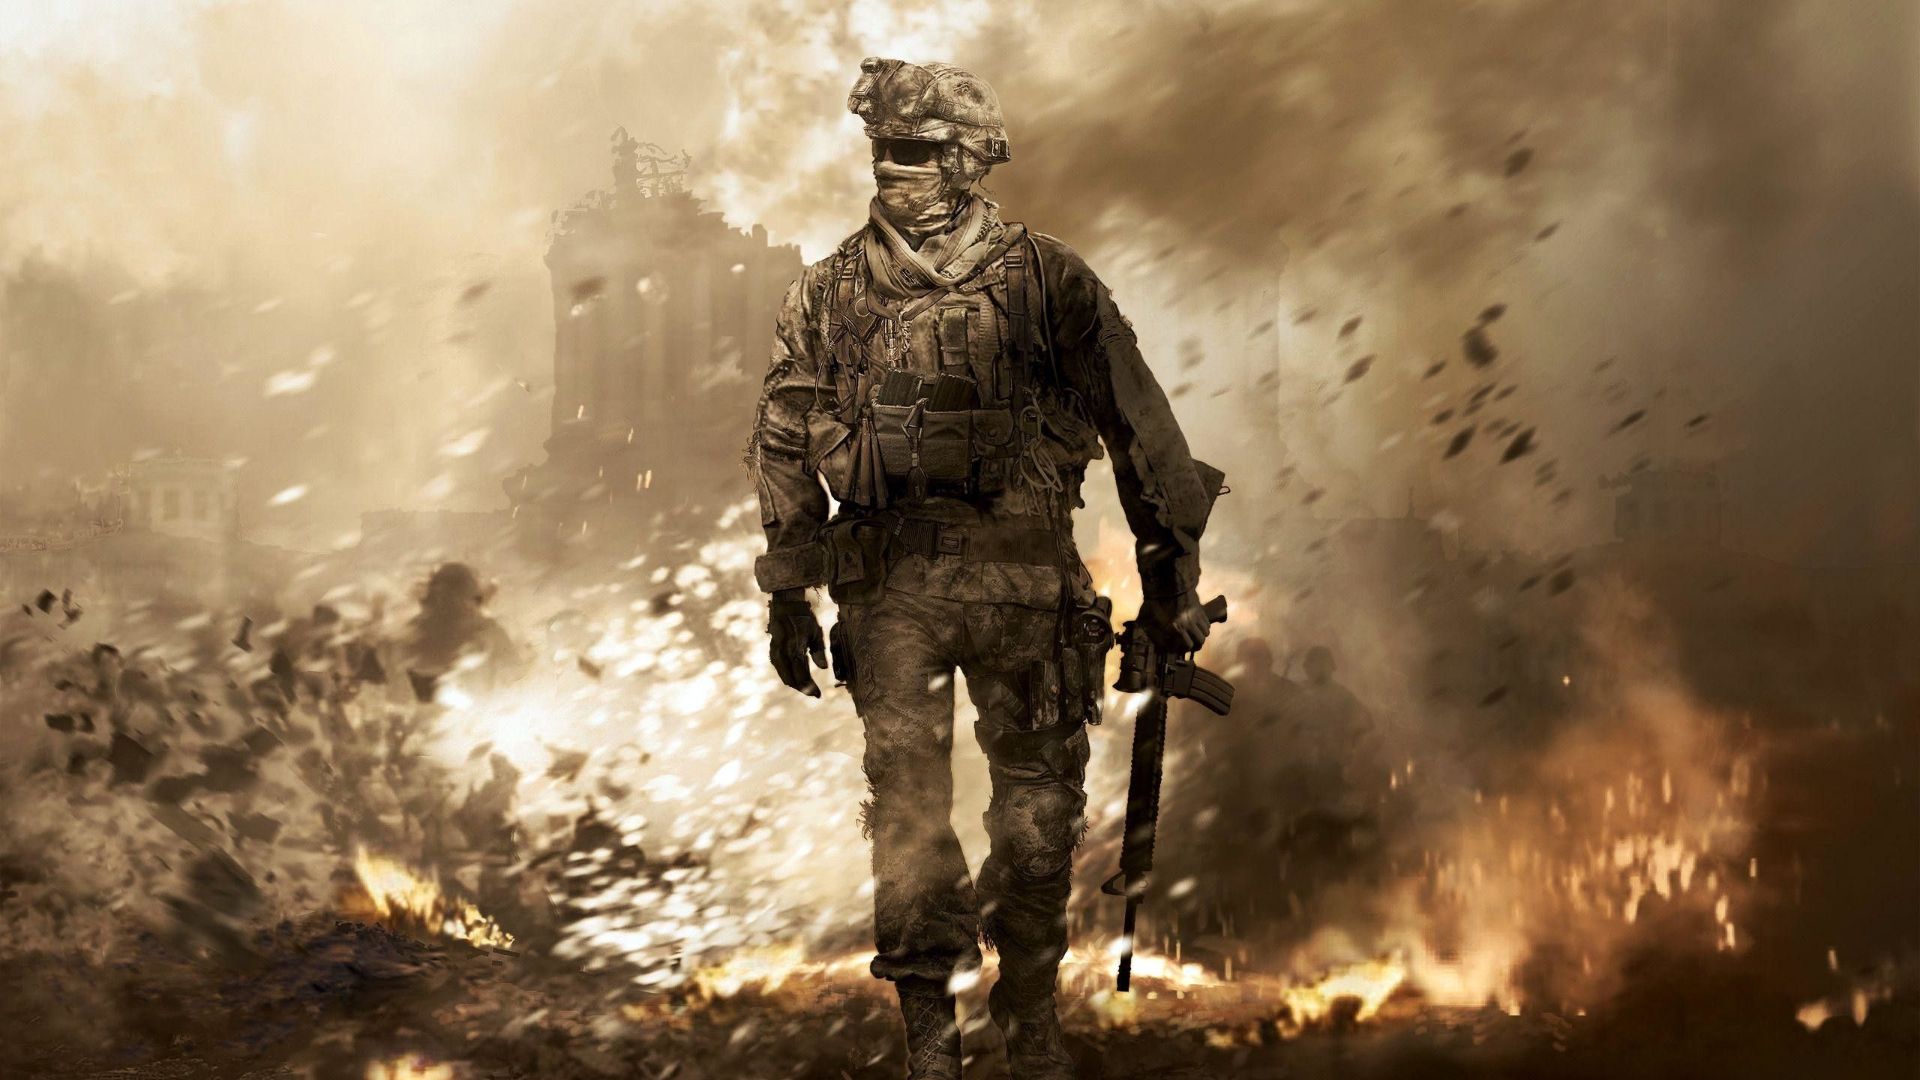 Call of Duty Wallpapers - Top Call of Duty Backgrounds